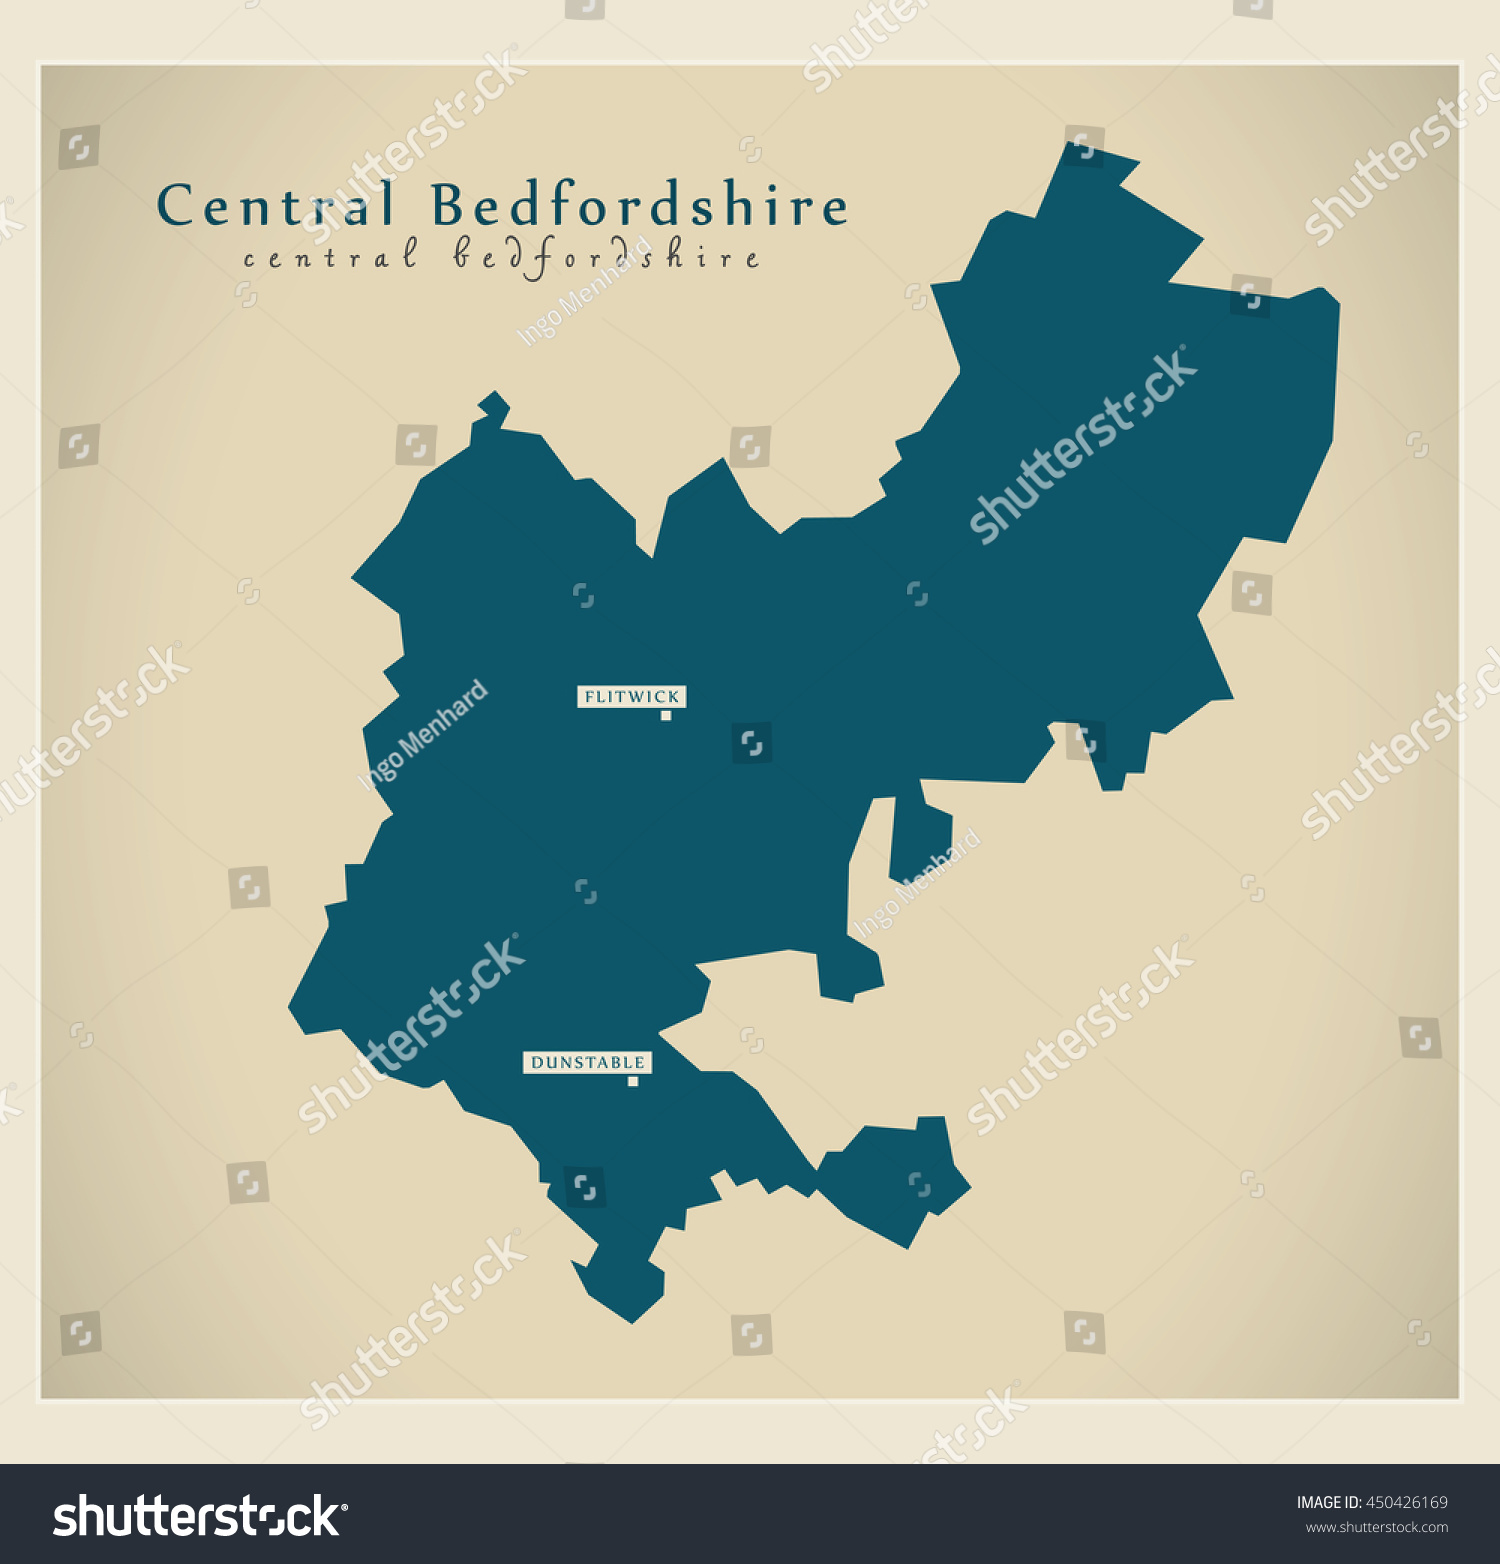 Modern Map - Central Bedfordshire unitary - Royalty Free Stock Vector ...